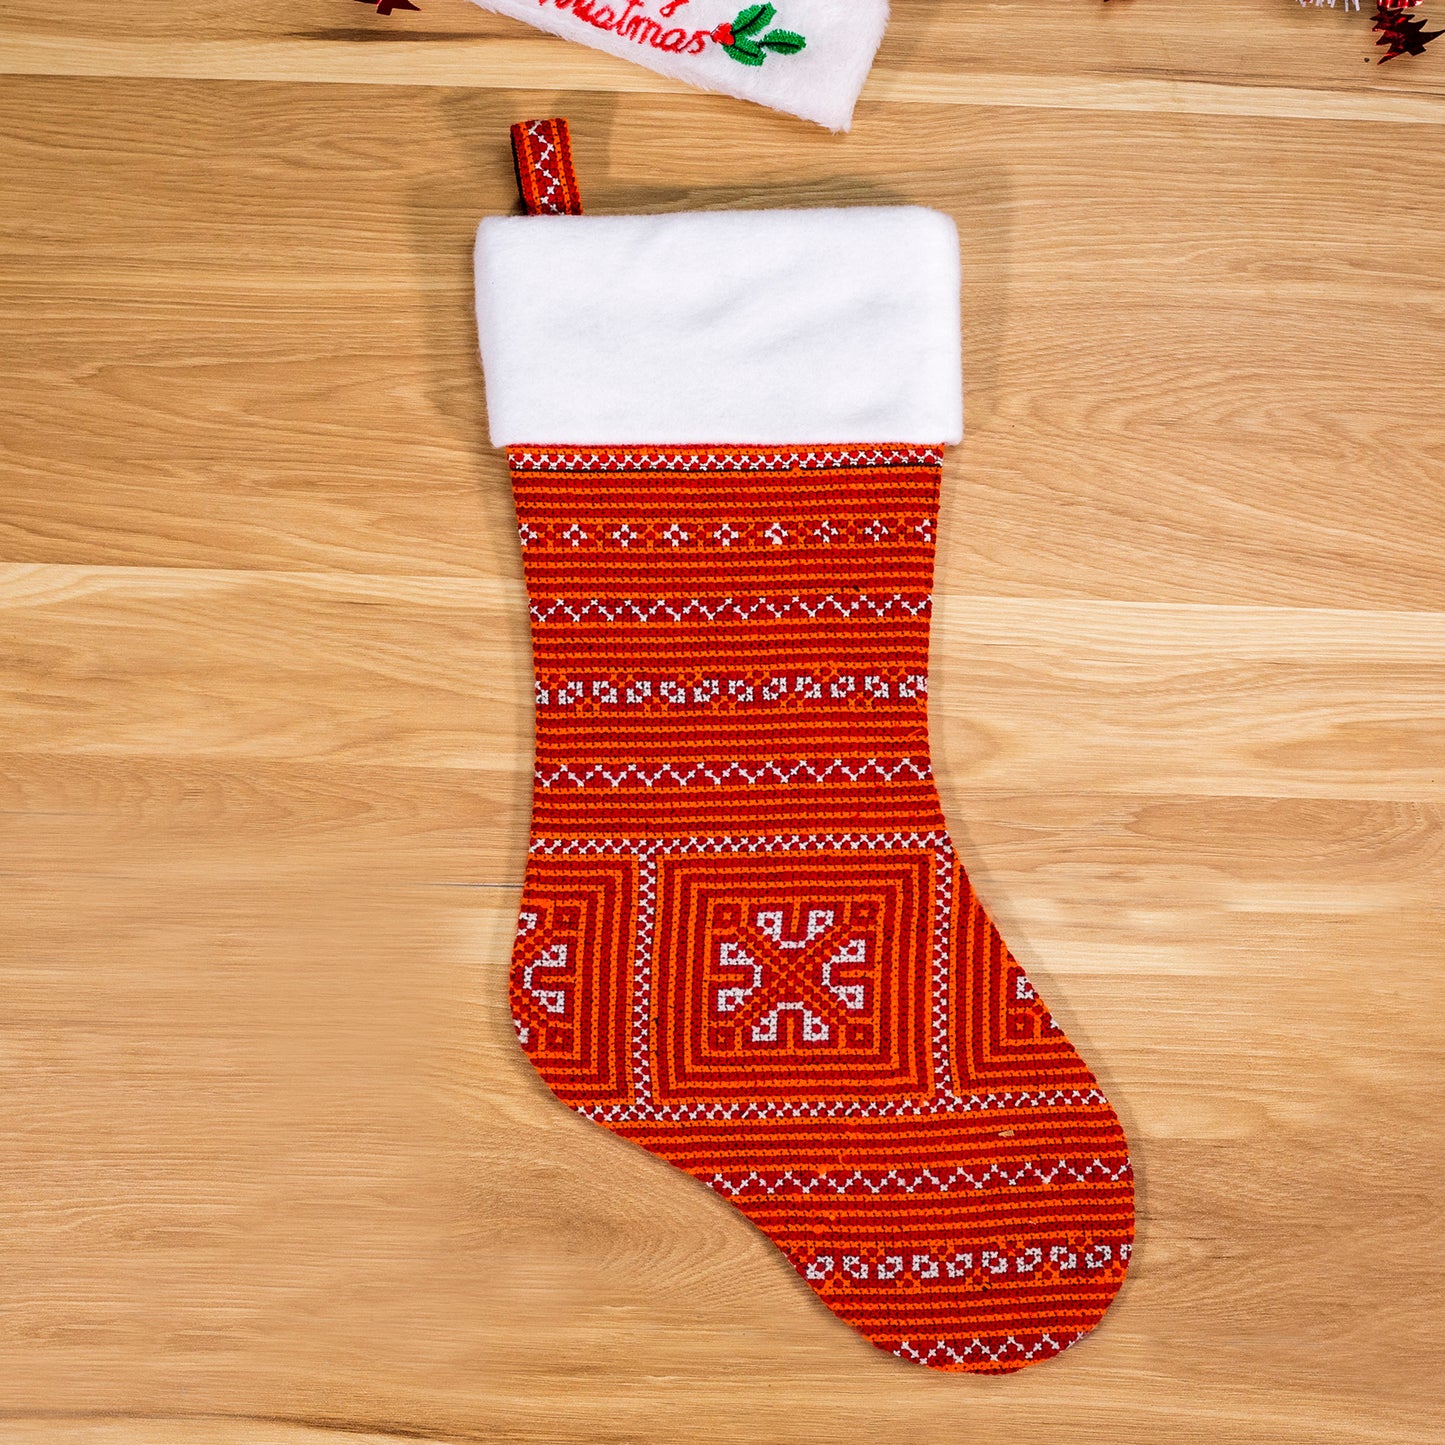 Christmas Stockings - Red and white